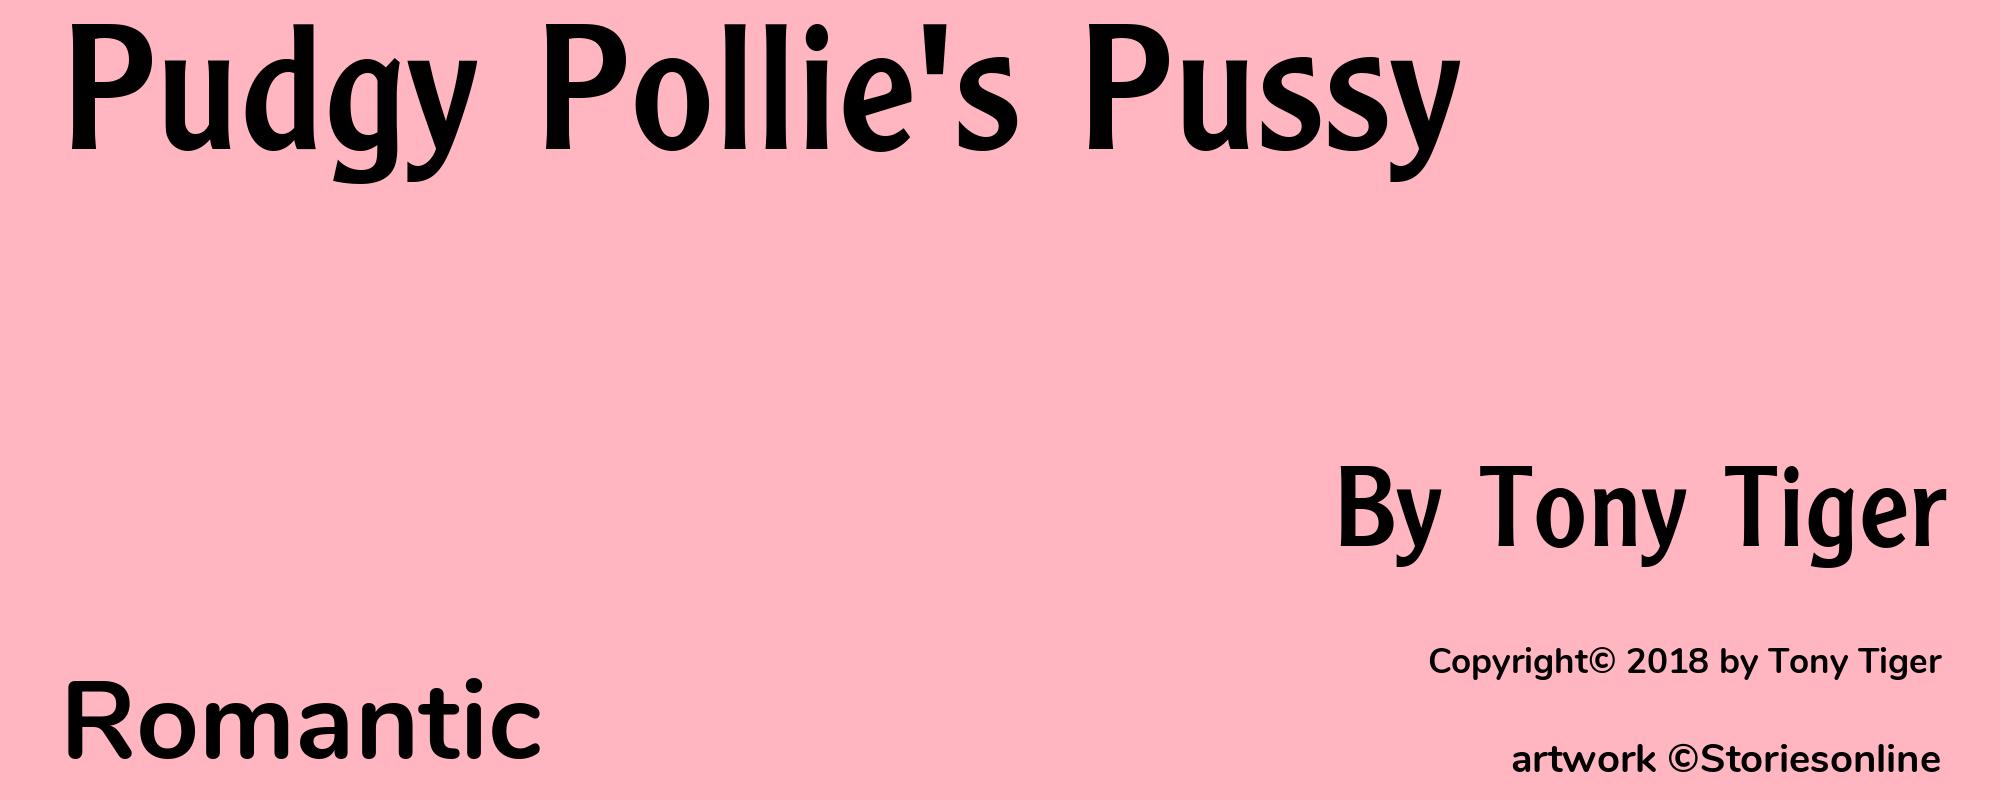 Pudgy Pollie's Pussy - Cover